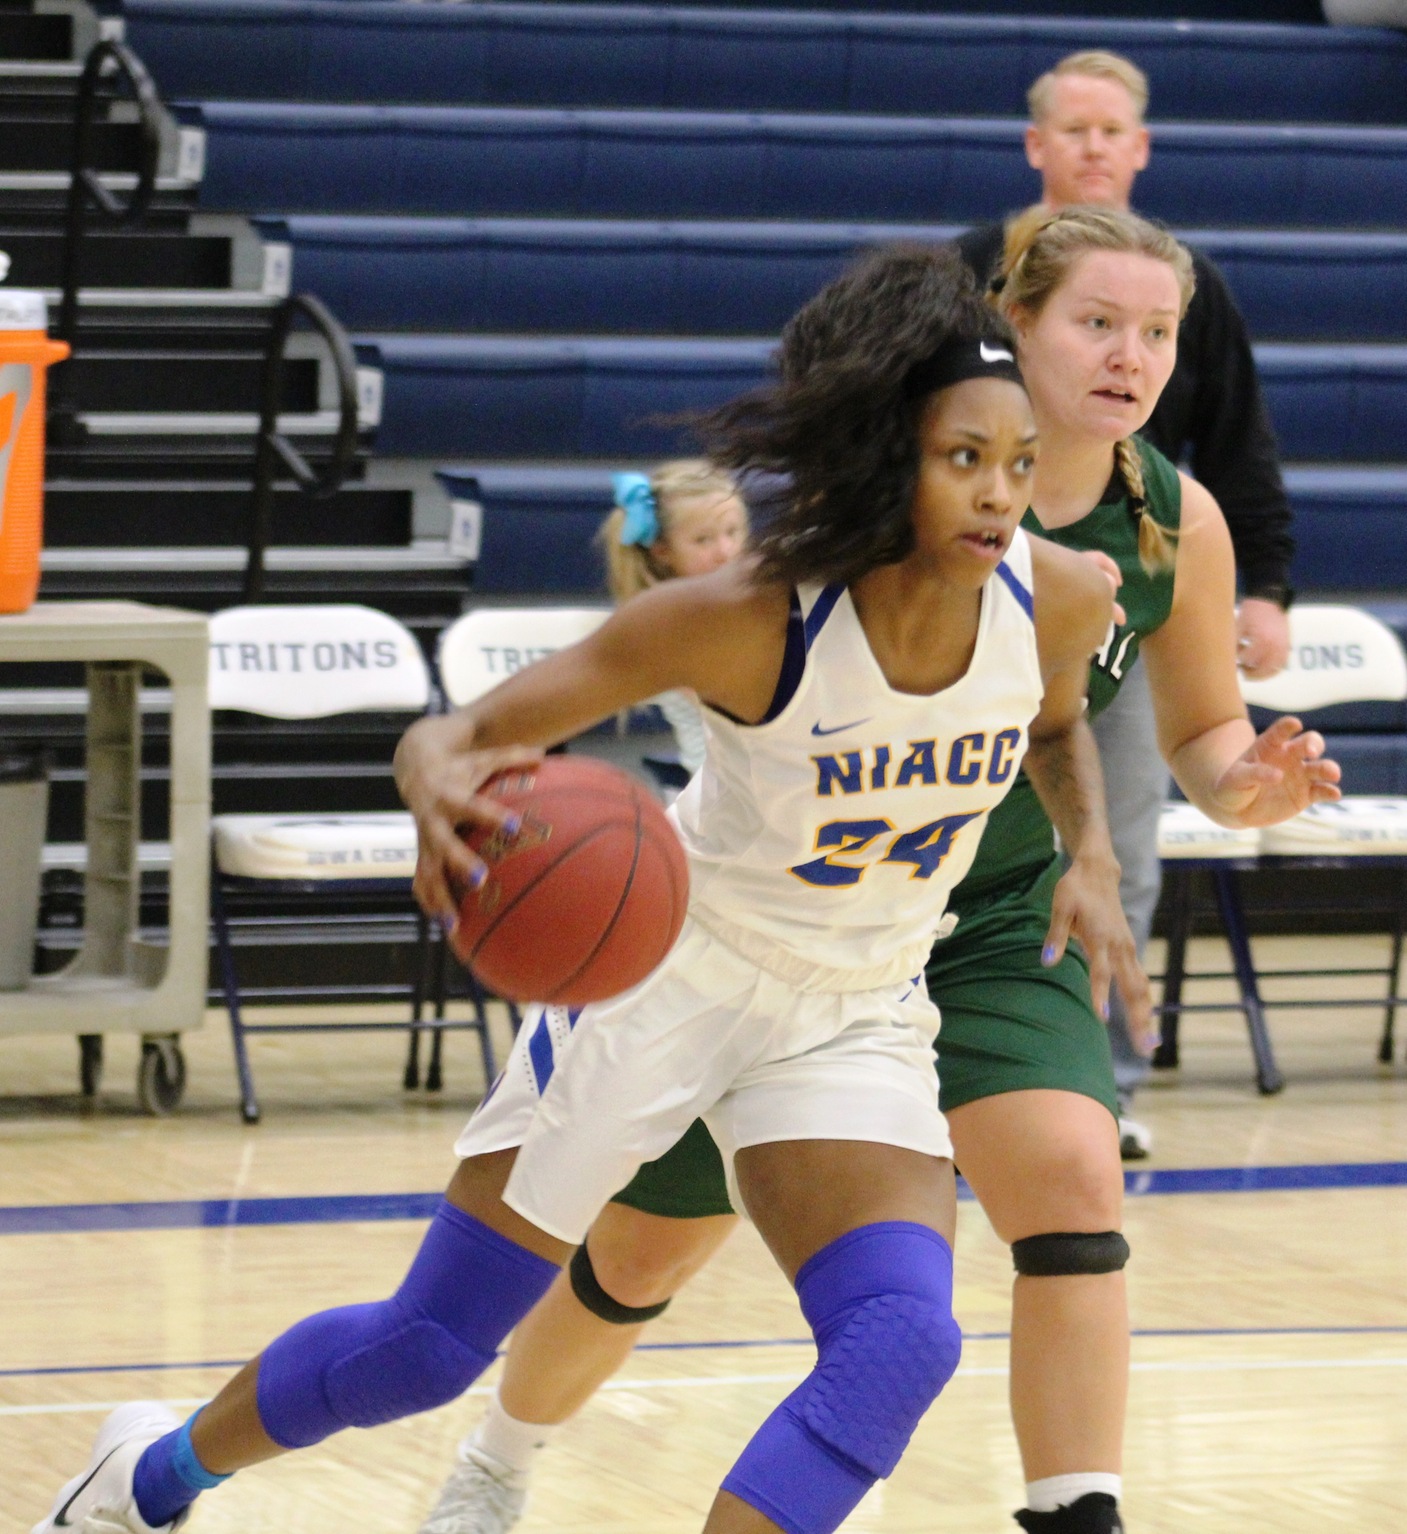 NIACC's Khalilah Holloway drives to the basket against Central CC on Dec. 2 in Fort Dodge.